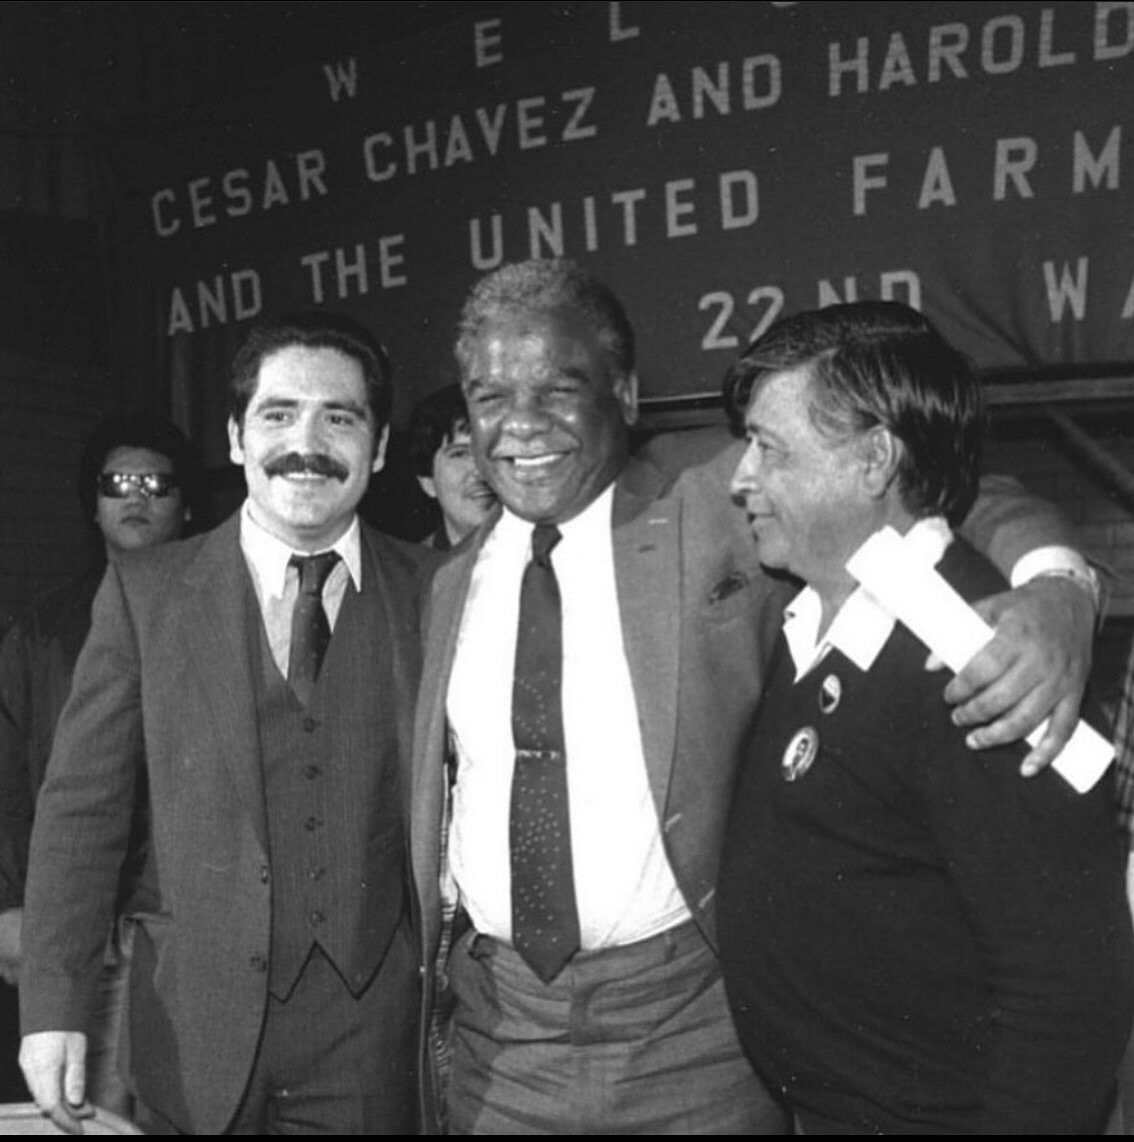 Feliz C&eacute;sar Ch&aacute;vez Day! 

As the son of a bracero I am especially grateful for the leadership of labor rights activist Cesar Ch&aacute;vez. Chicago and members the 22nd Ward IPO were fortunate to organize with him to protect workers and